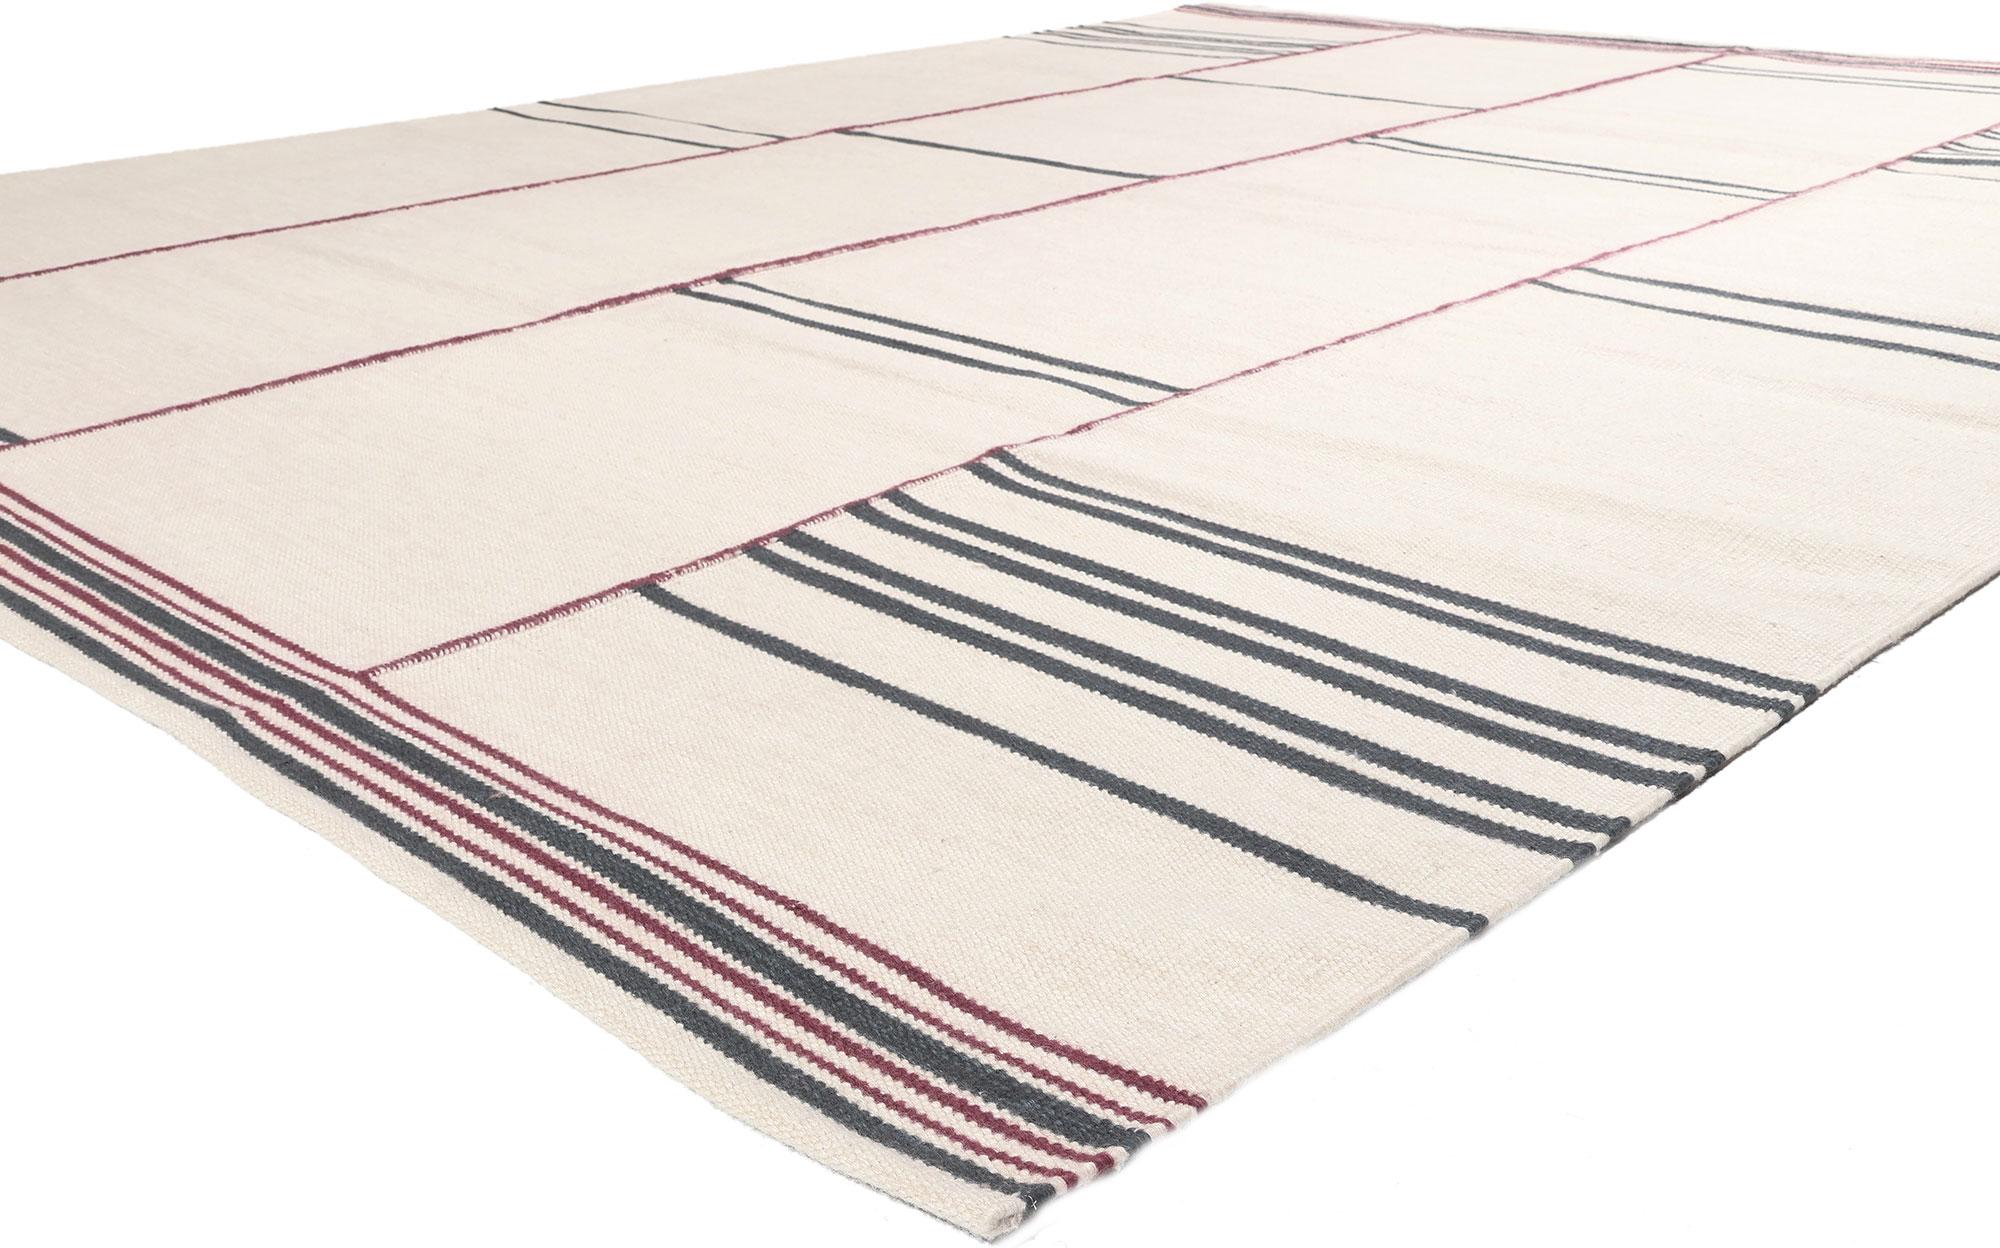 30958 New Swedish Inspired Kilim Rug, 10'01 x 12'10. Displaying simplicity with incredible detail and texture, this handwoven wool Swedish inspired Kilim rug provides a feeling of cozy contentment without the clutter. The eye-catching ladder stripe